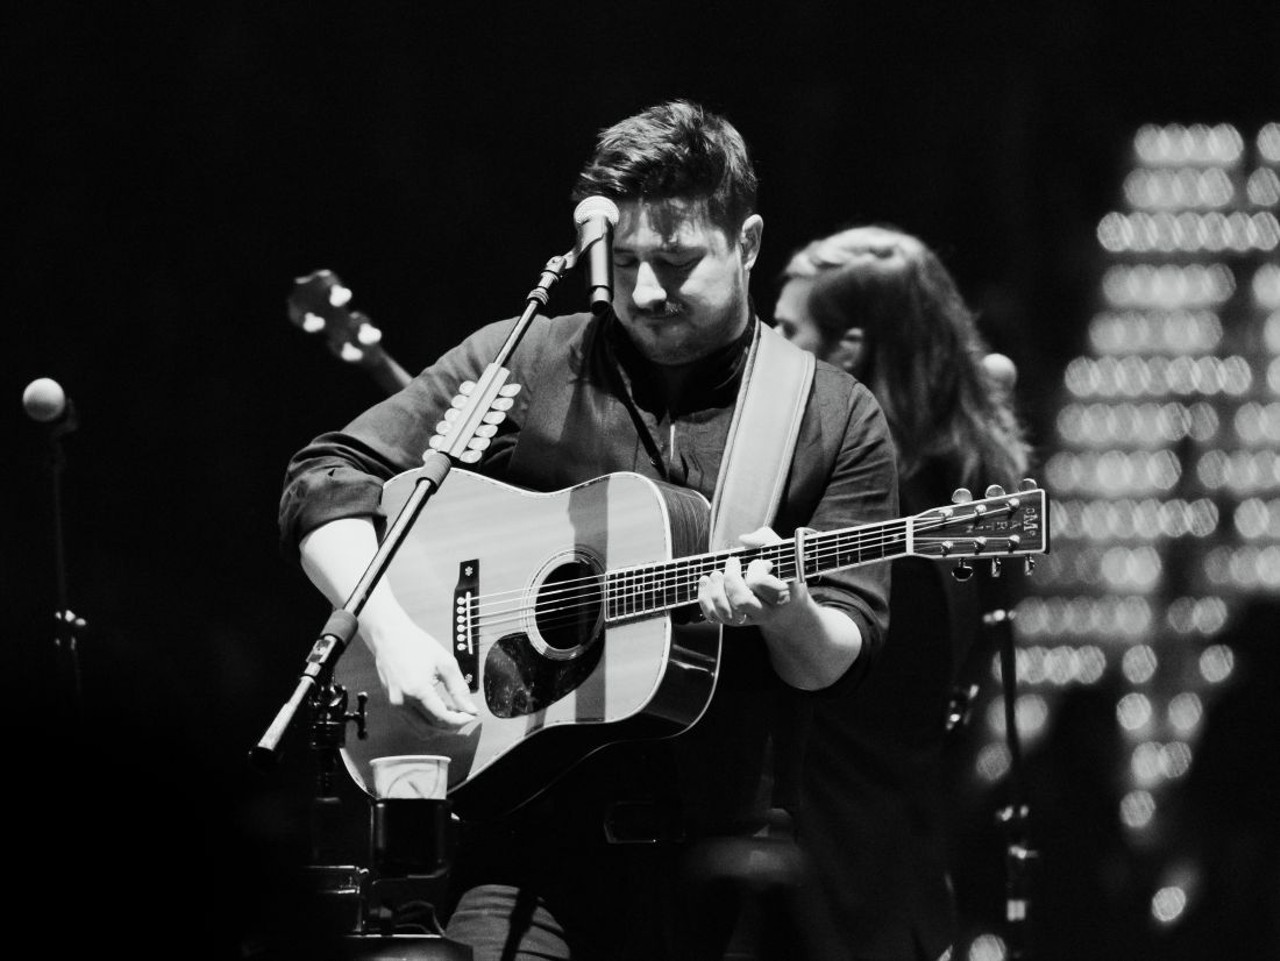 Photos of Mumford & Sons Performing at the Q